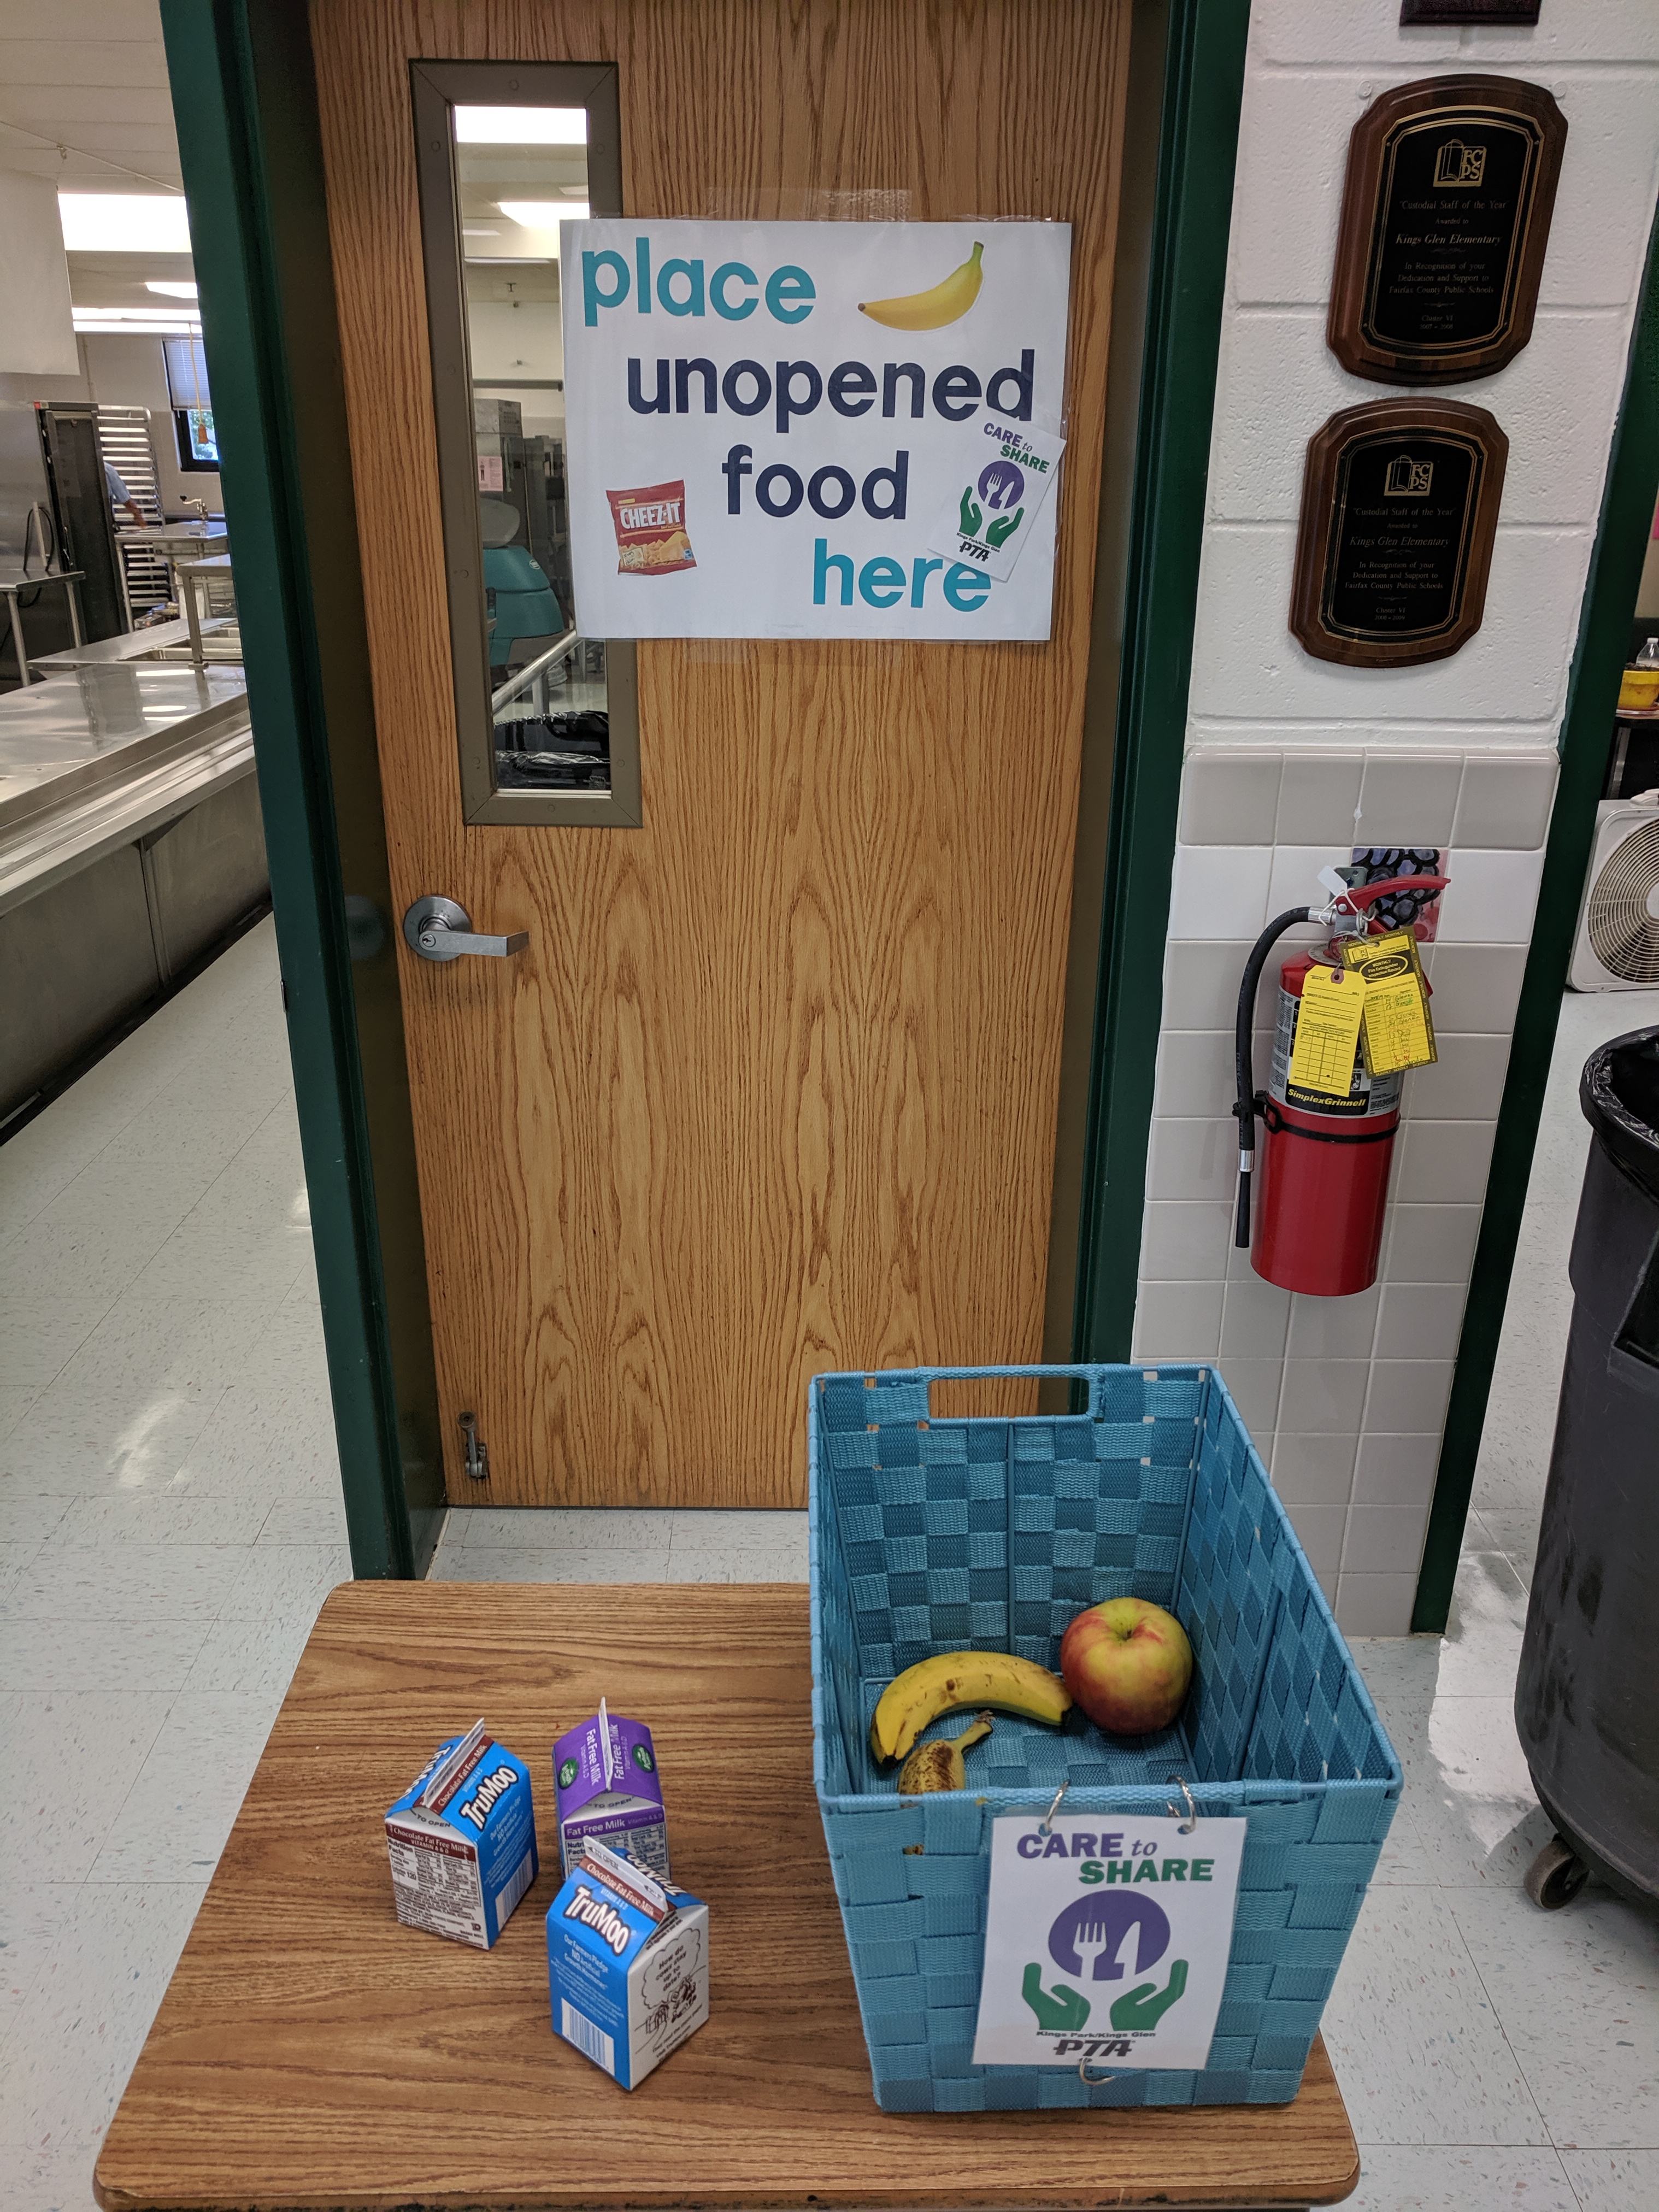 Care to Share station at a local school